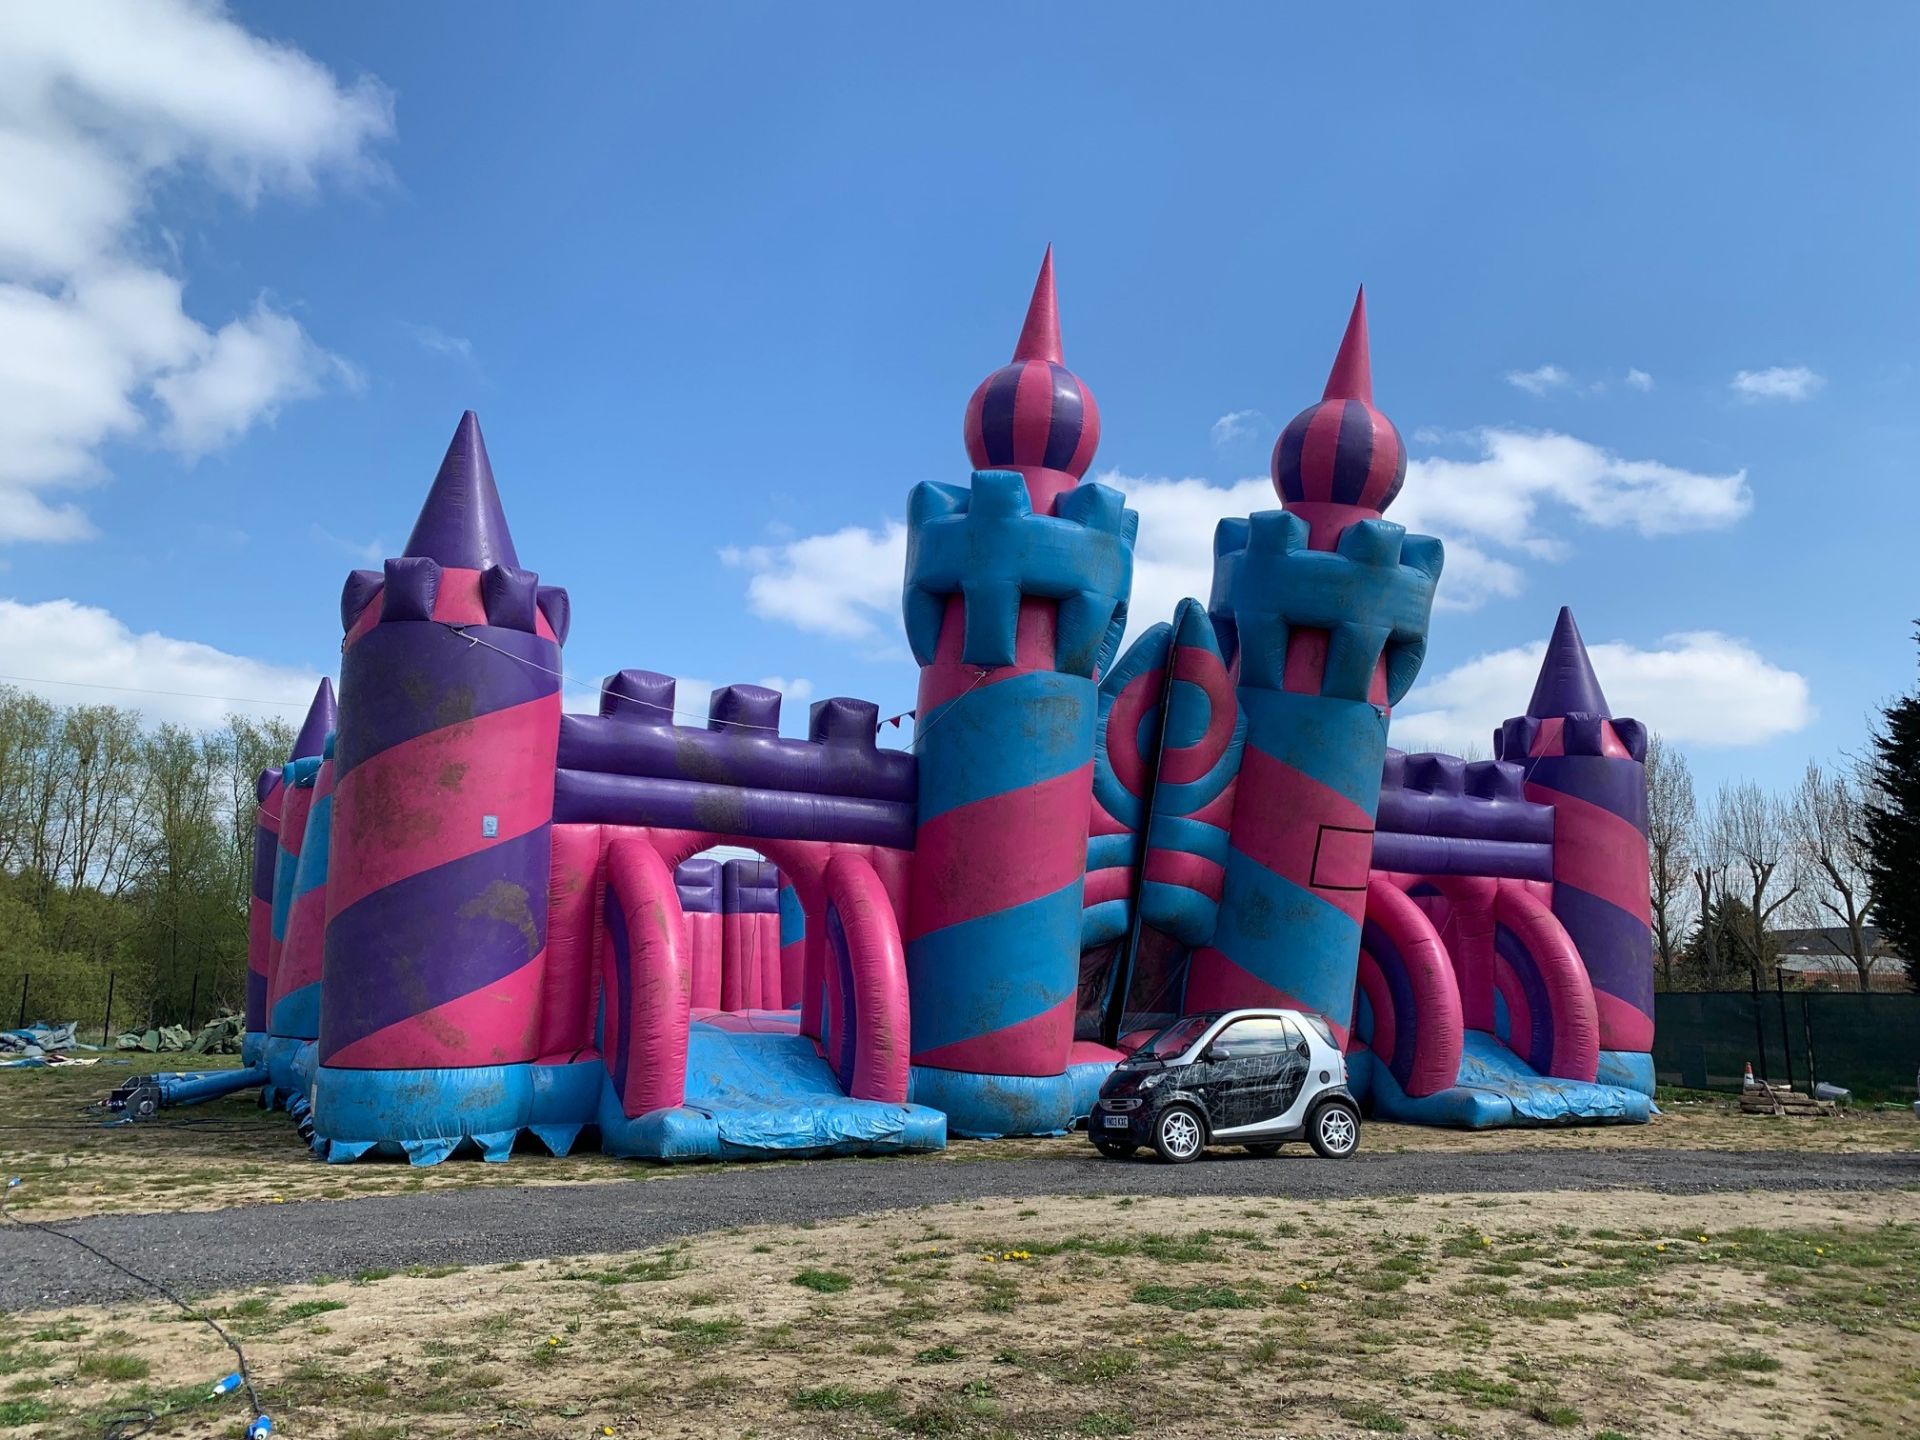 COLOSSAL INFLATABLE CASTLE. 24M X 21M APPROX SIZE. WHEN BUILT BELIEVED TO HAVE BEEN THE LARGEST IN